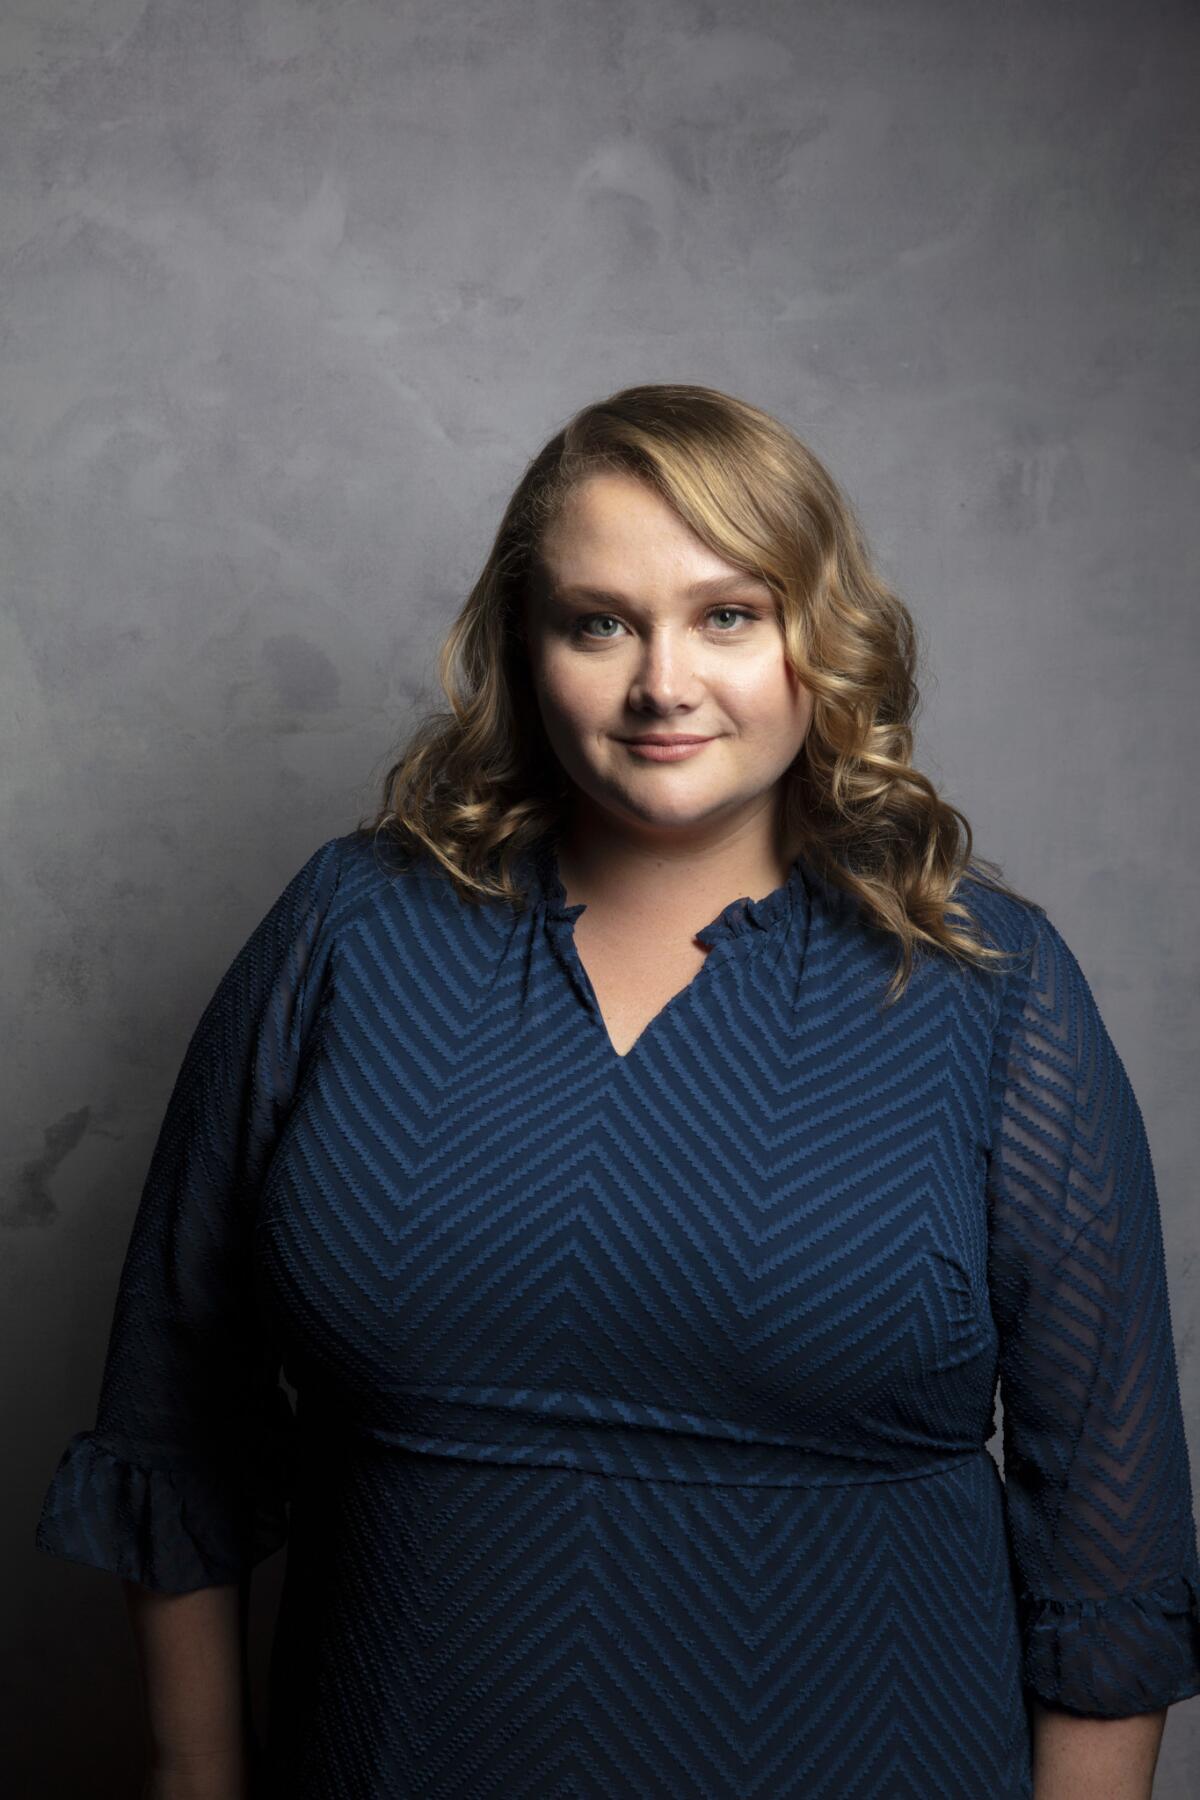 Actress Danielle Macdonald from the film "Skin."